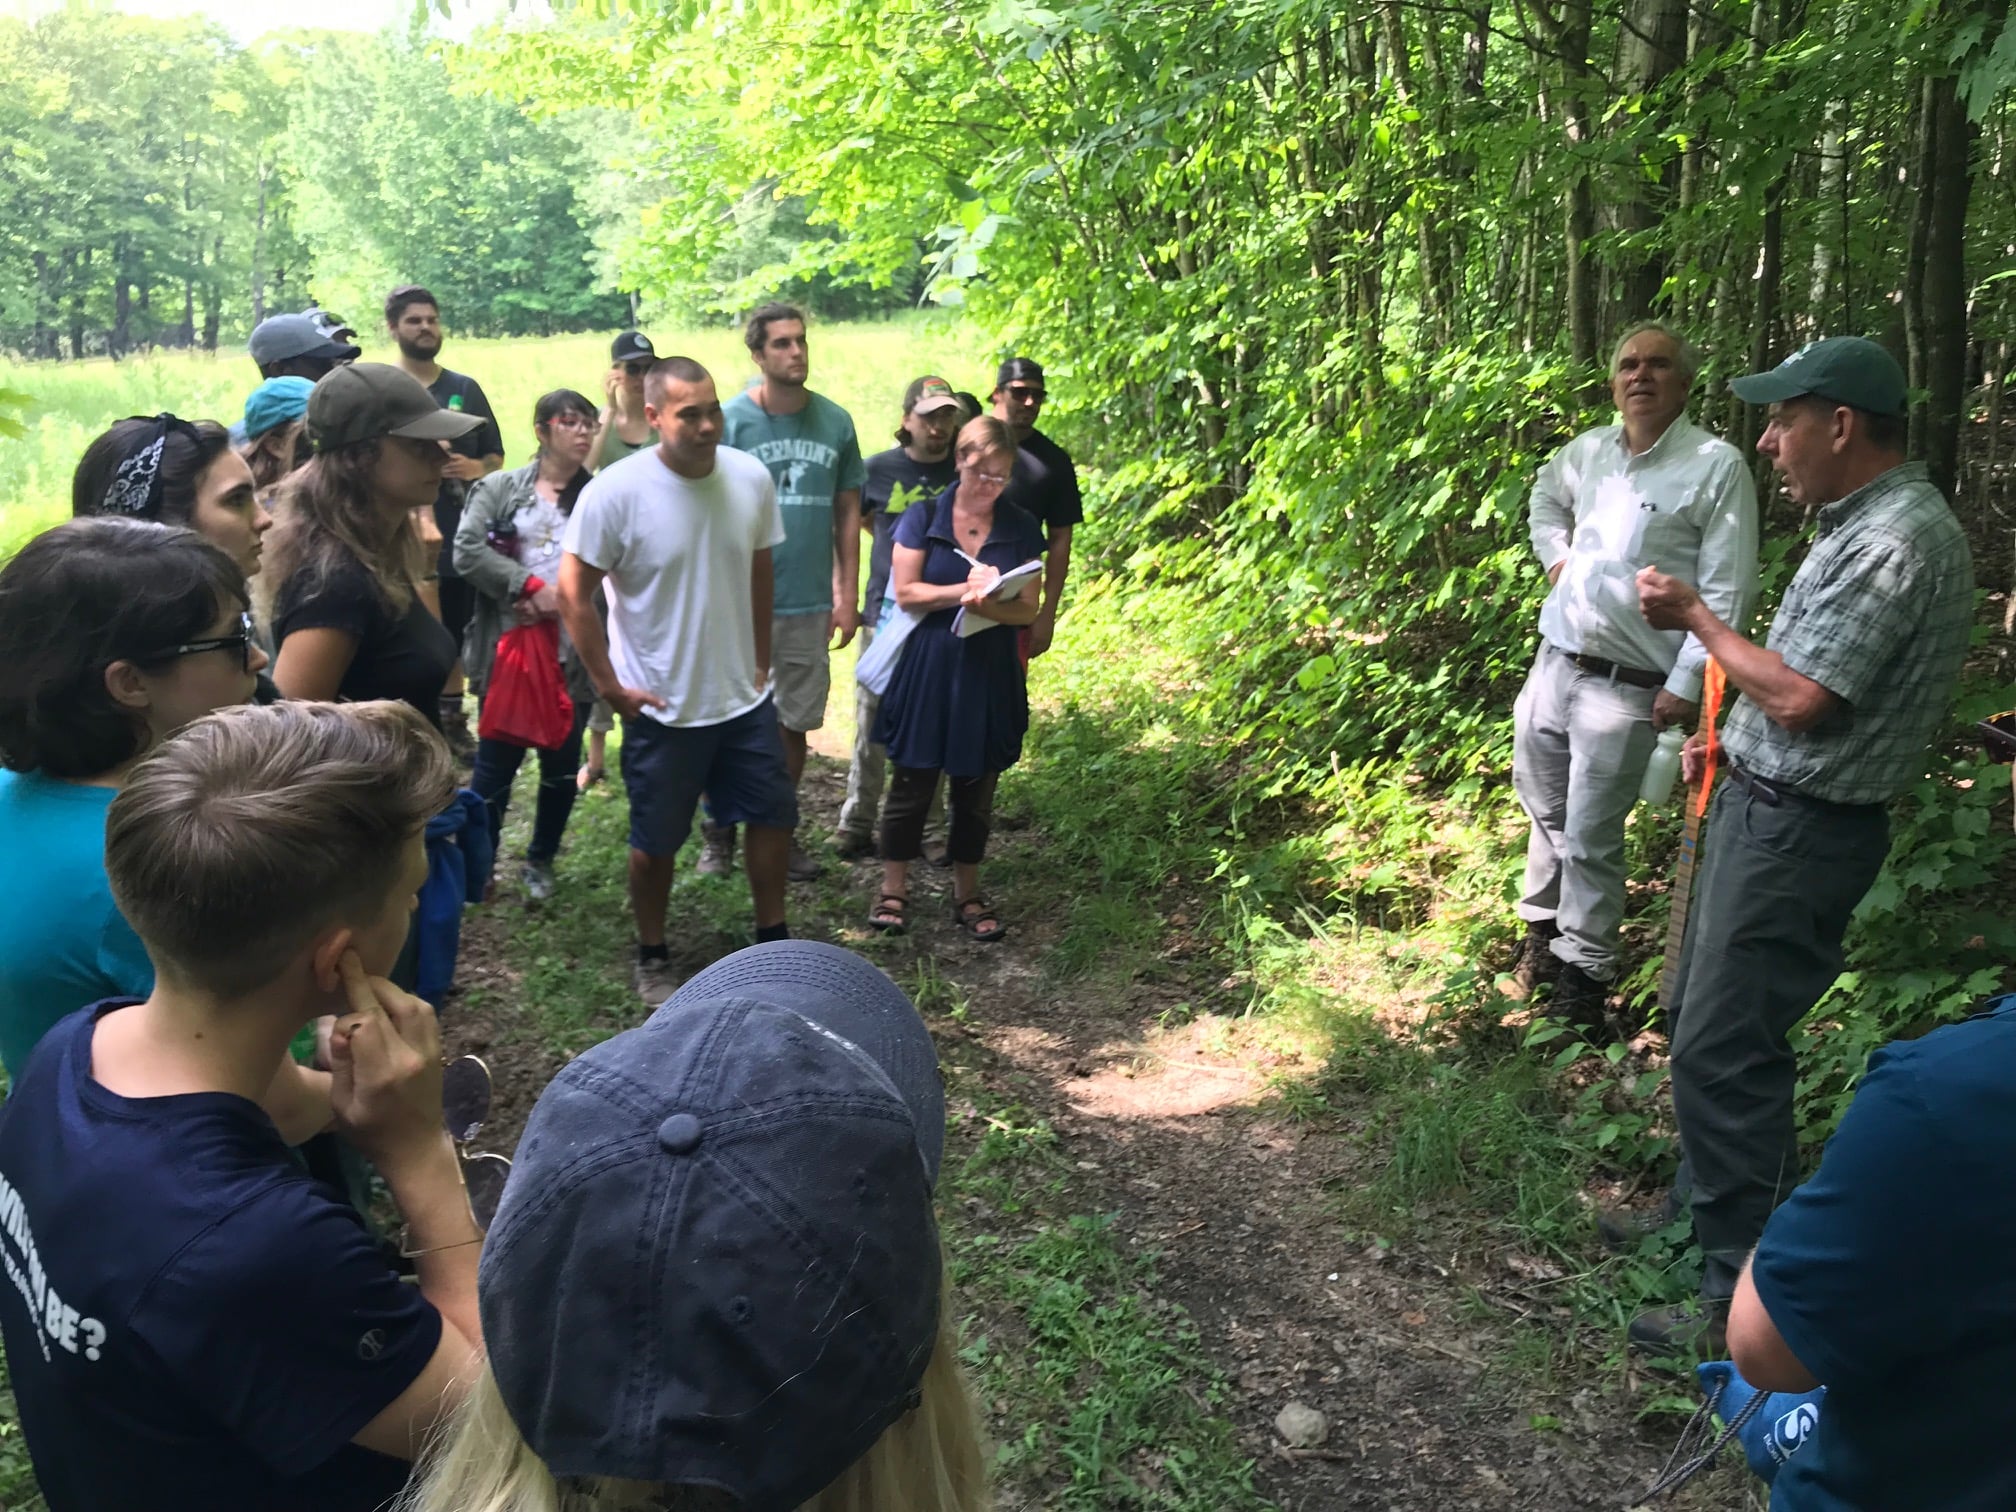 Students standing and listening to a professor near a wooded area.